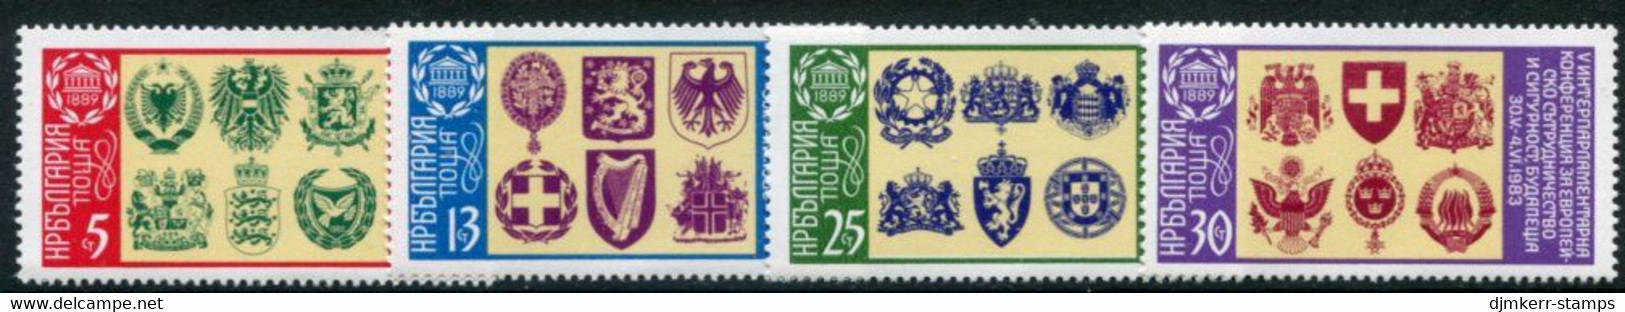 BULGARIA 1983 Interparliamentary Conference  MNH / **.  Michel 3174-77 - Unused Stamps